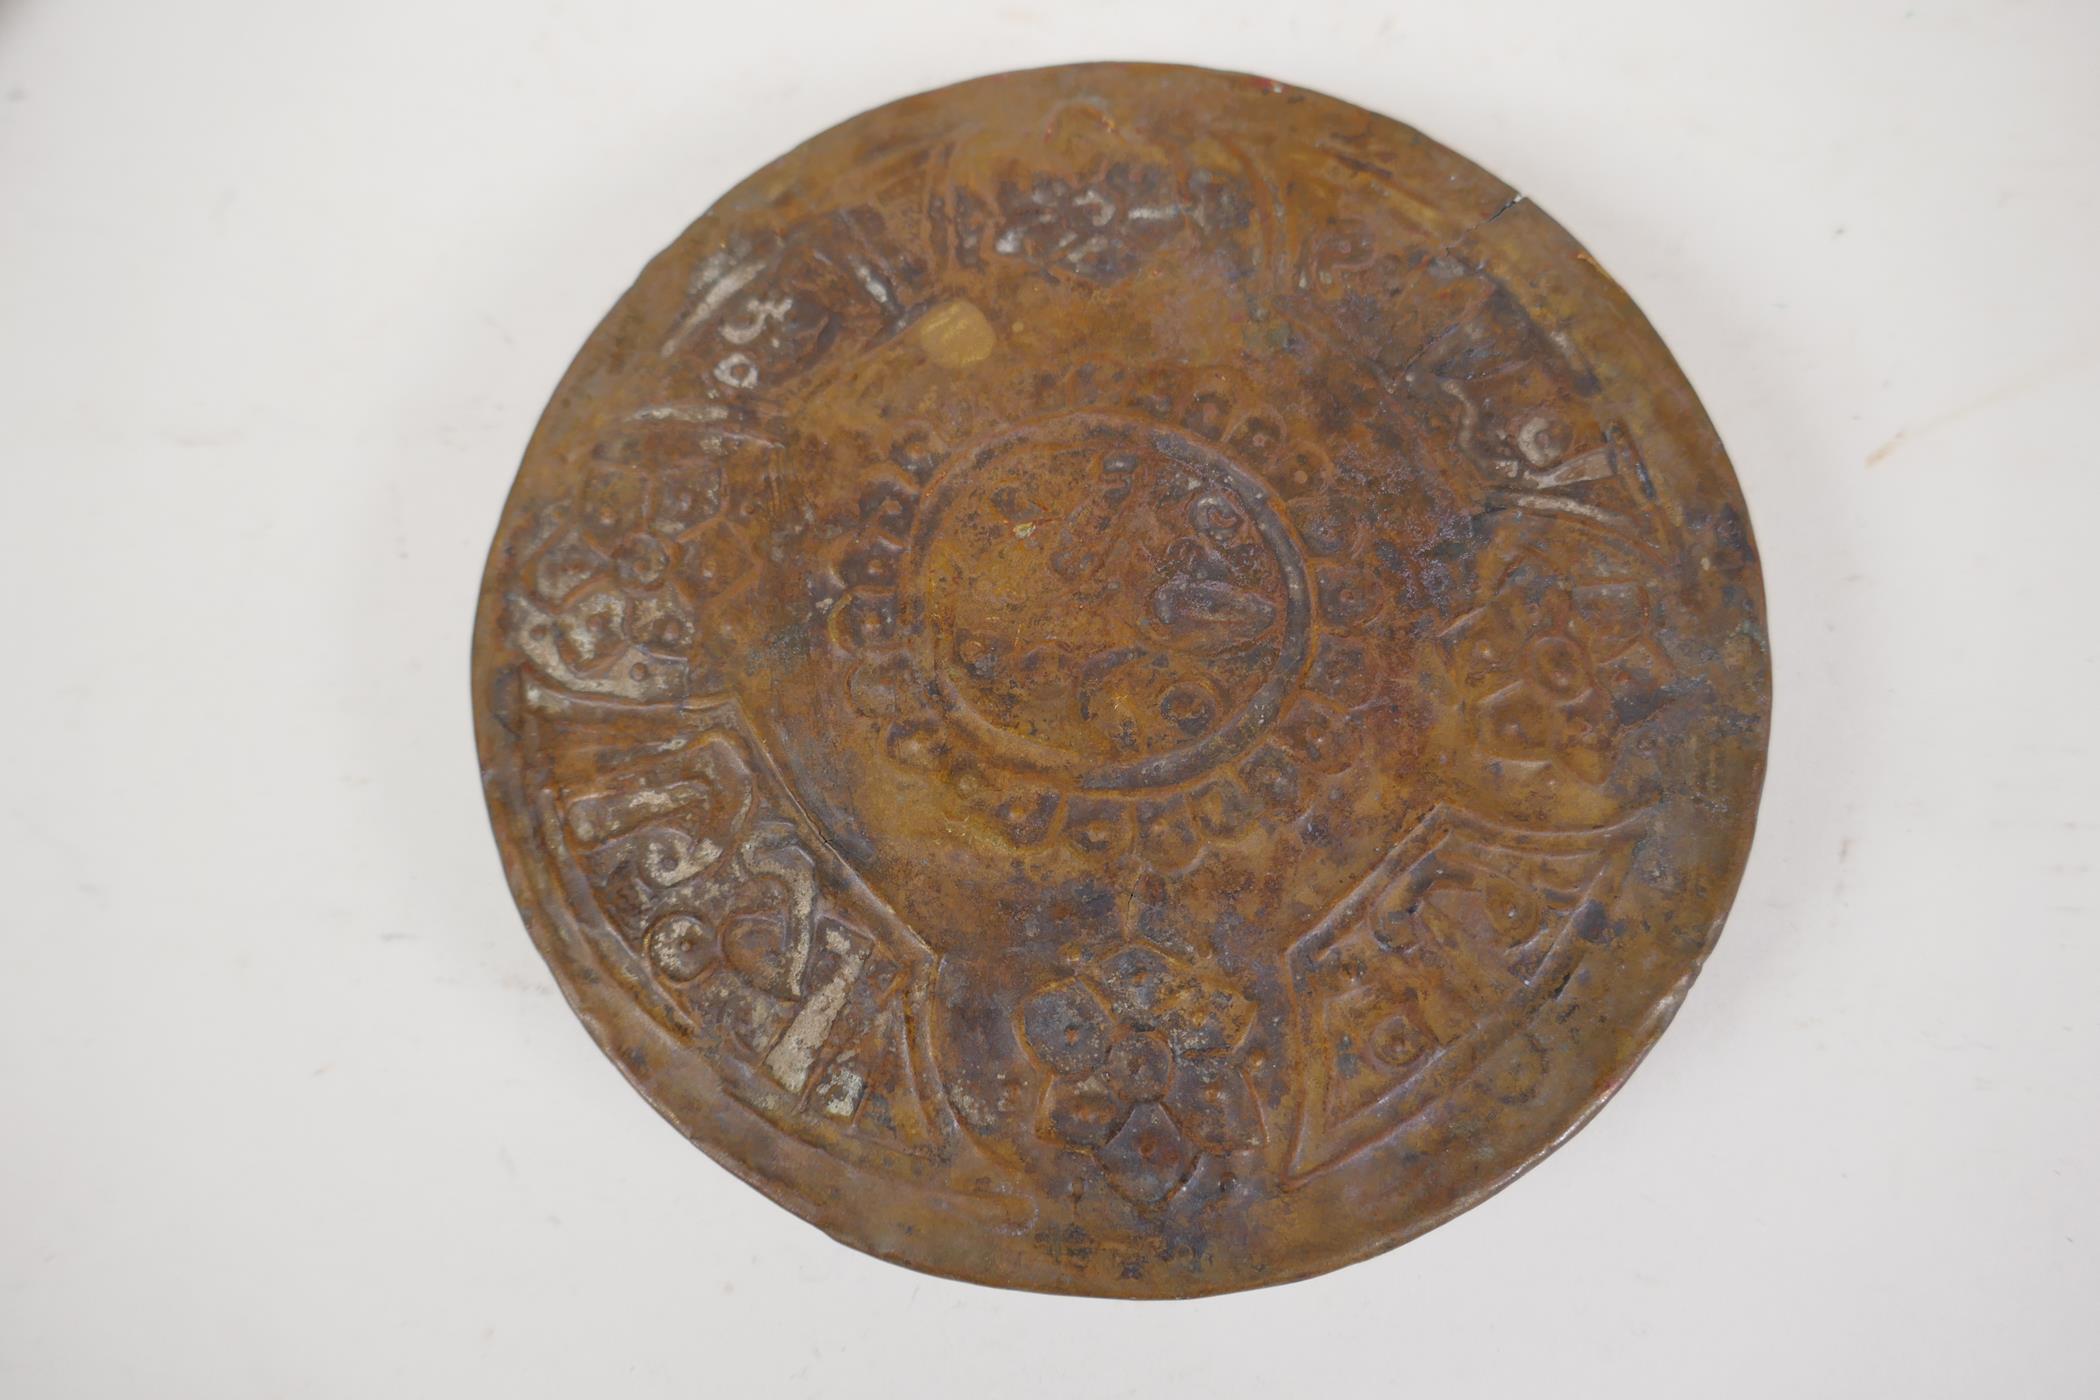 A Persian metal shallow bowl with repousse embossed decoration, 6" diameter - Image 4 of 4